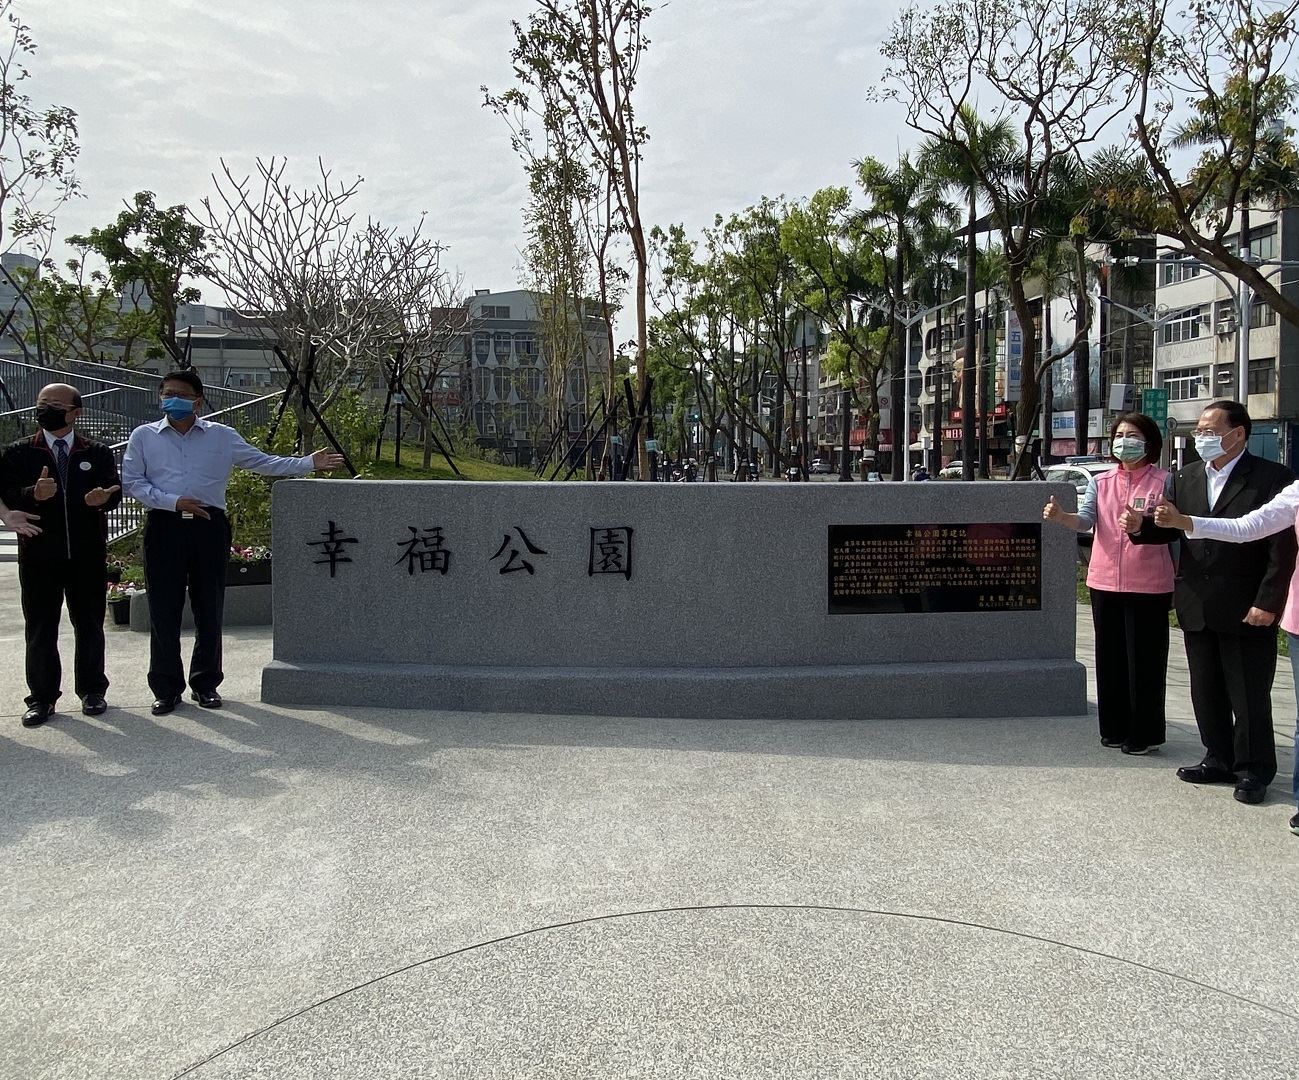 It not only includes parking, but also a variety of amenities for people of all ages. (Photo / Provided by Pingtung County Government)